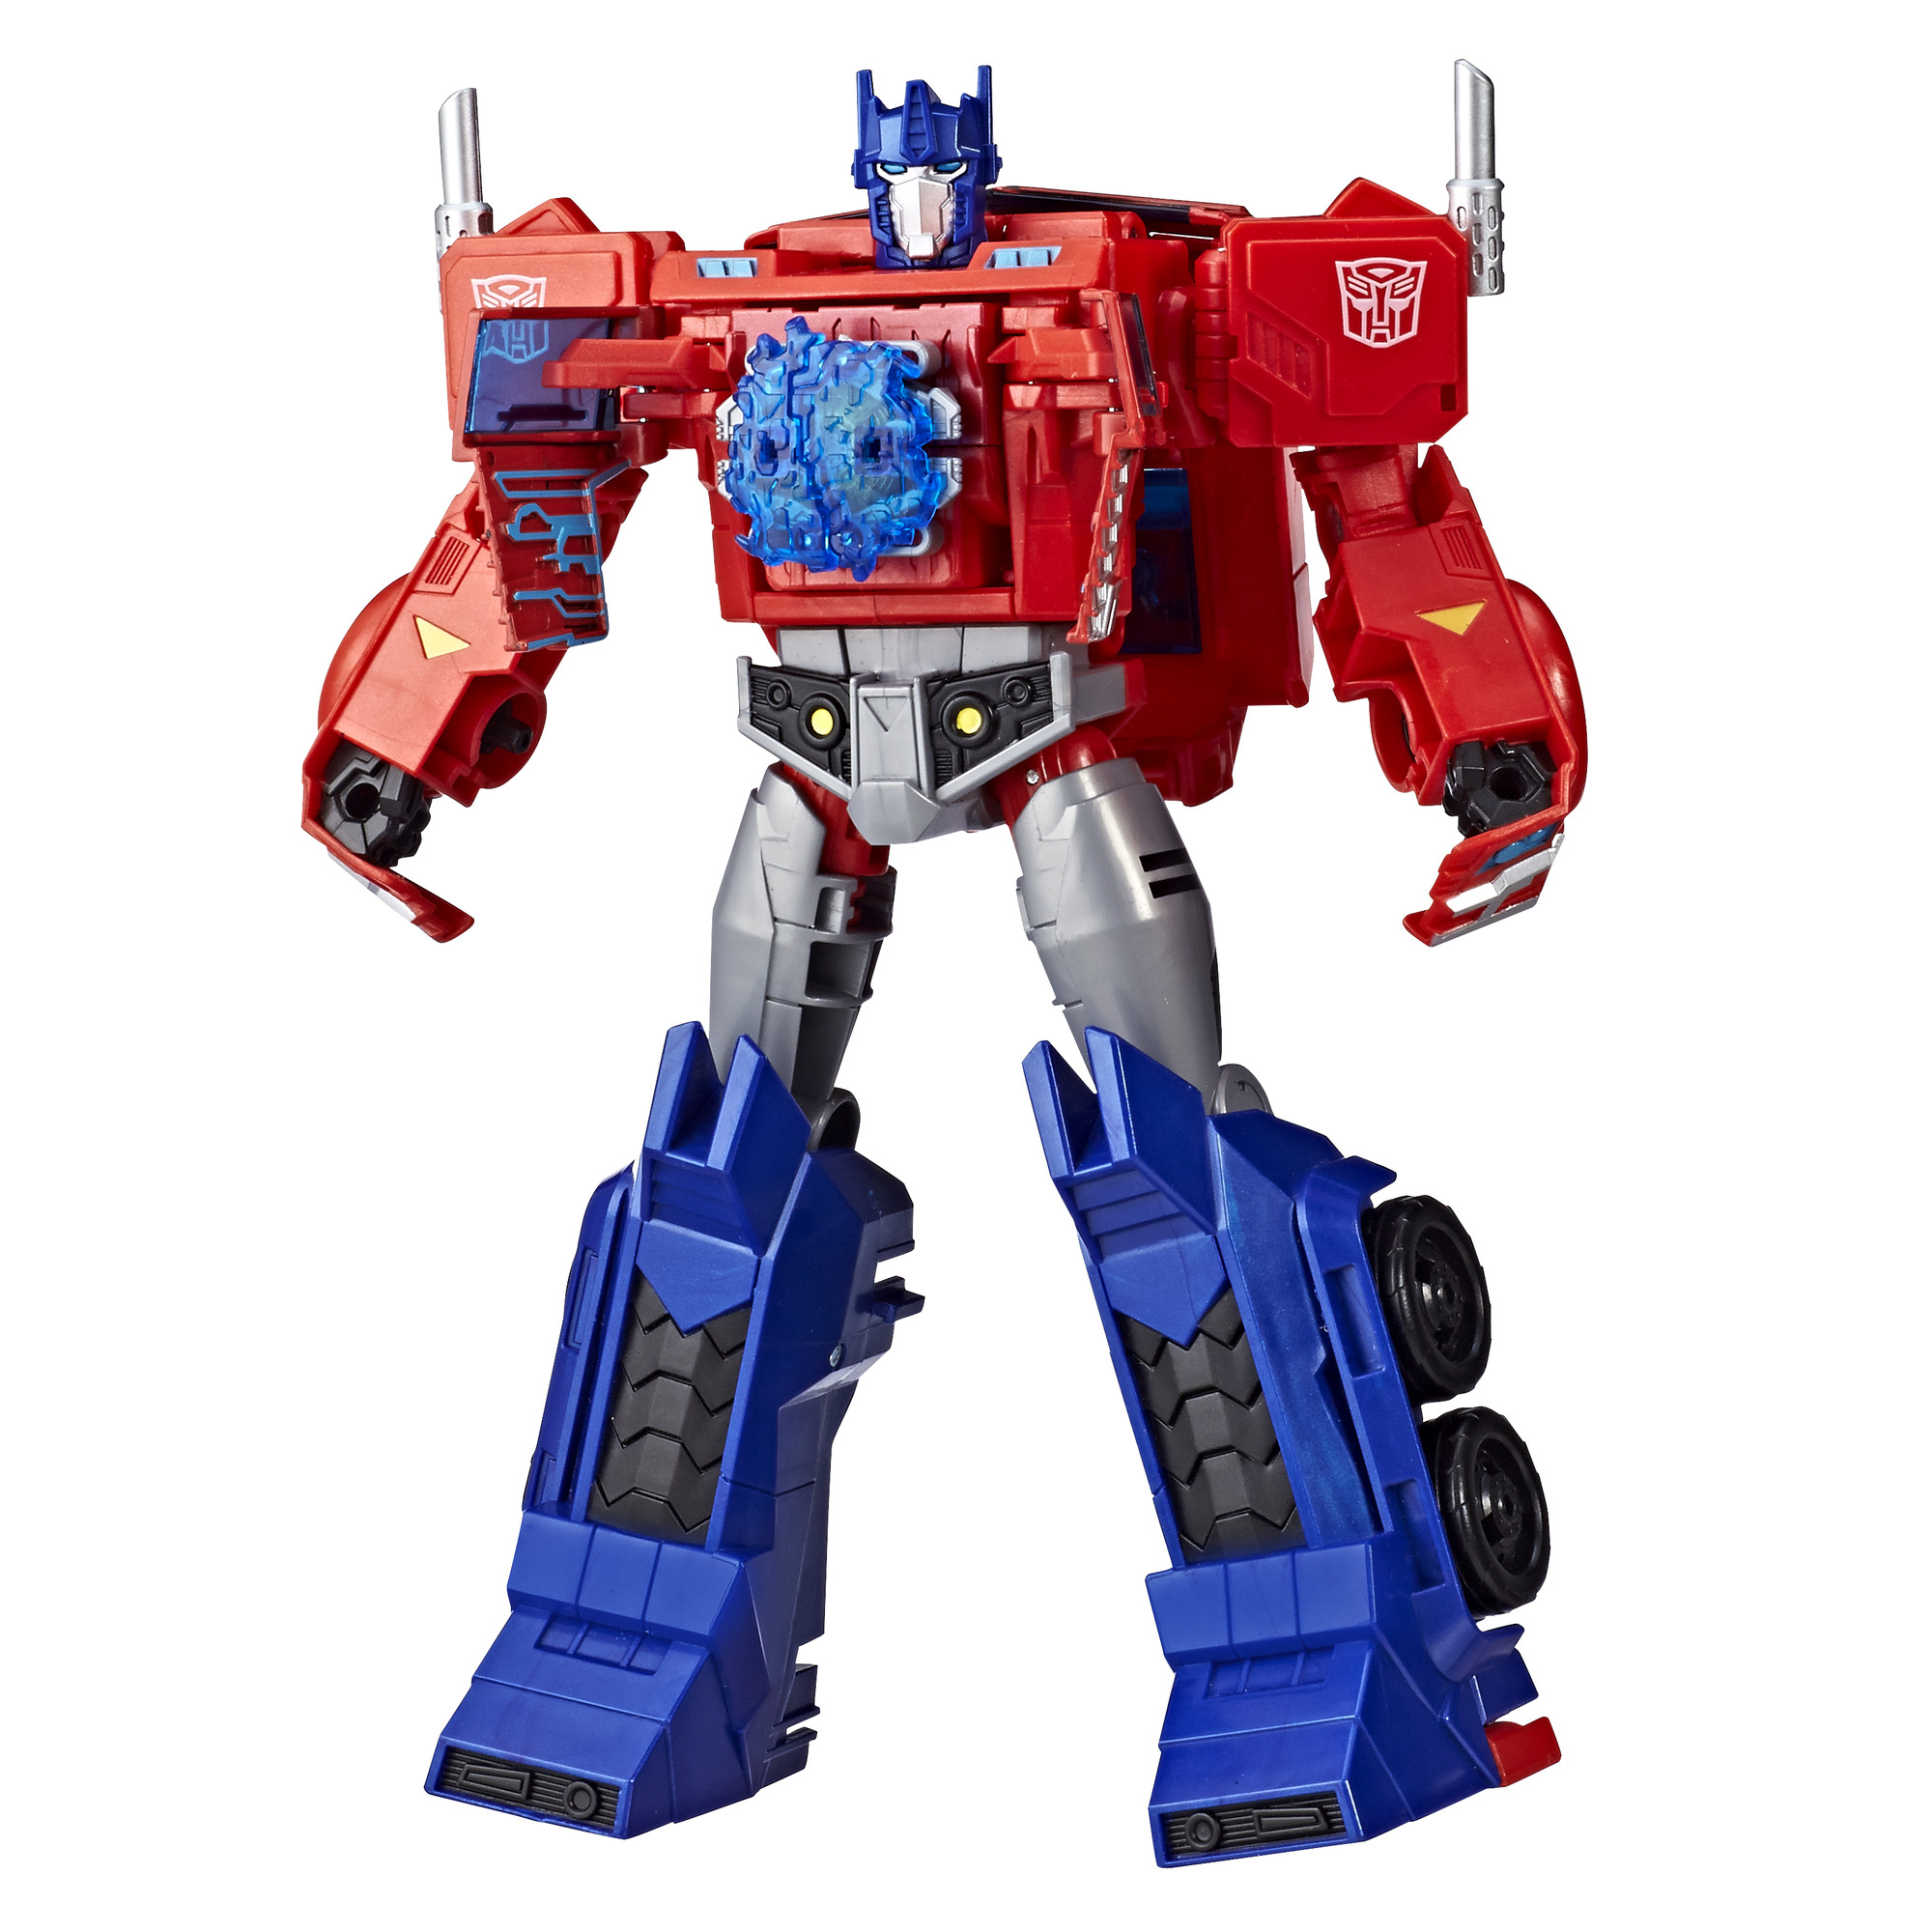 Transformers Cyberverse Ultimate Class Optimus Prime 11.5 Inch Action Figure - image 1 of 9